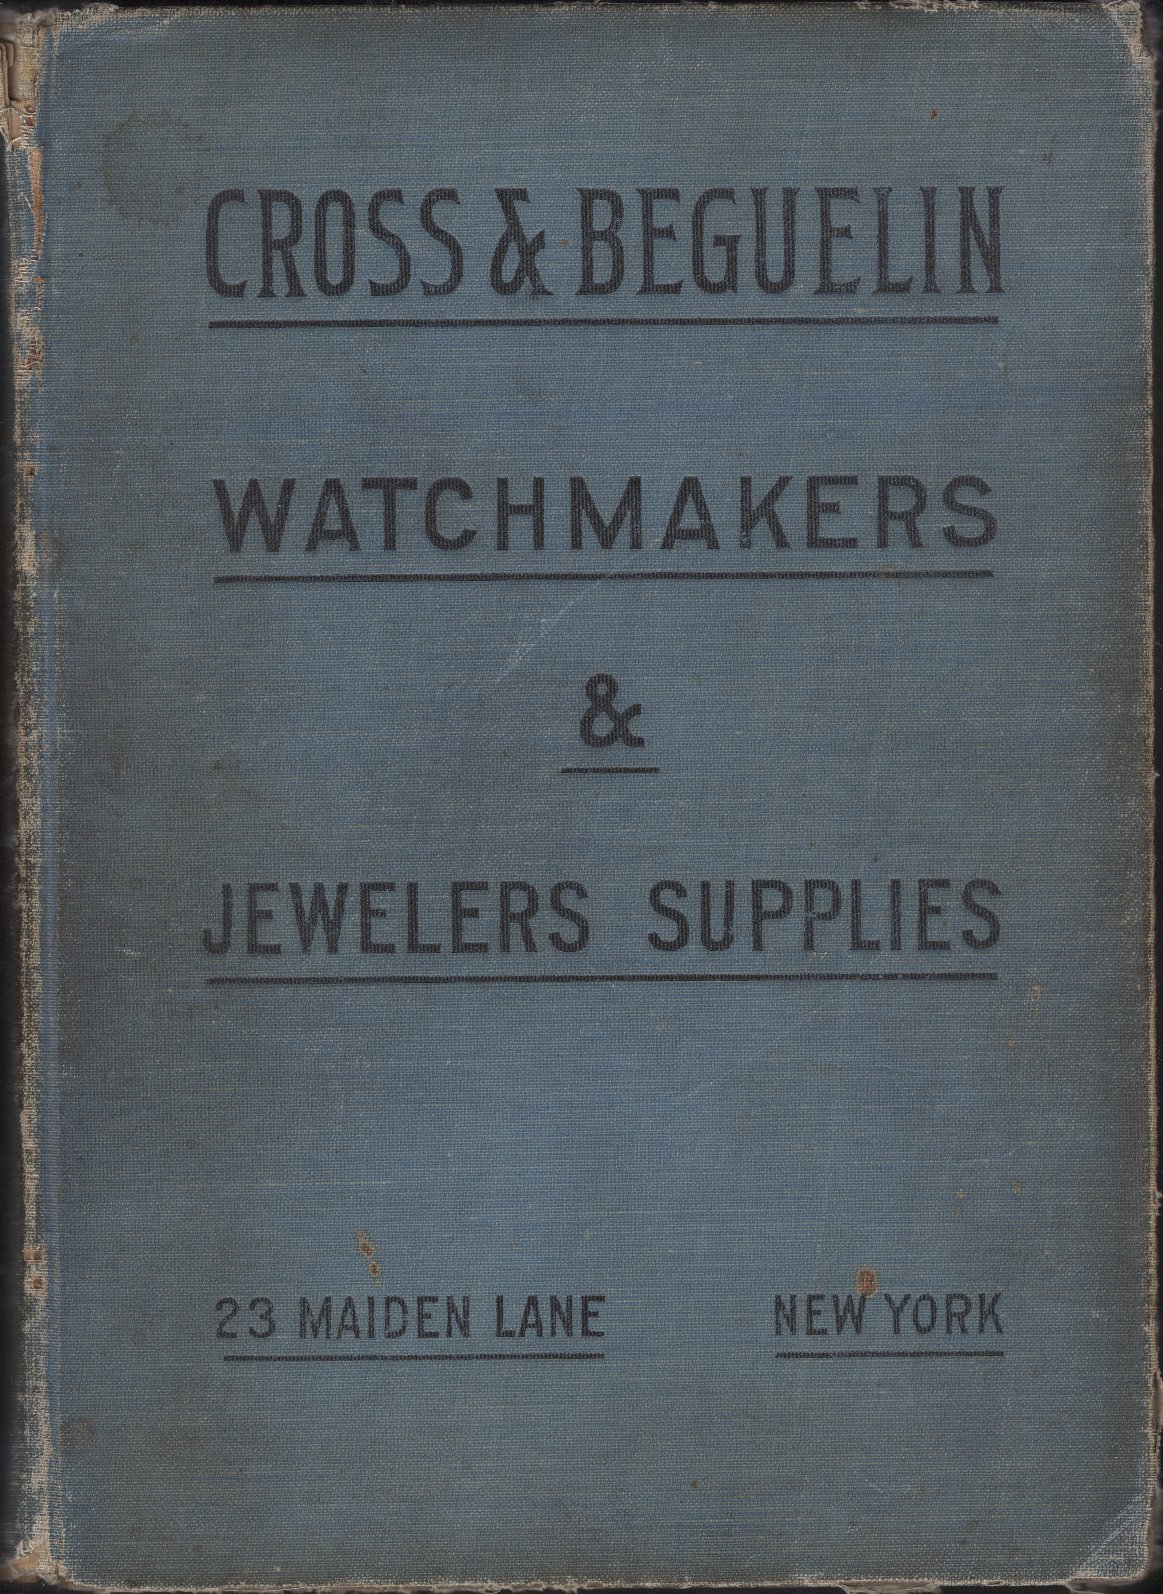 1910 Cross & Beguelin: Aurora Parts Material Catalog Cover Image